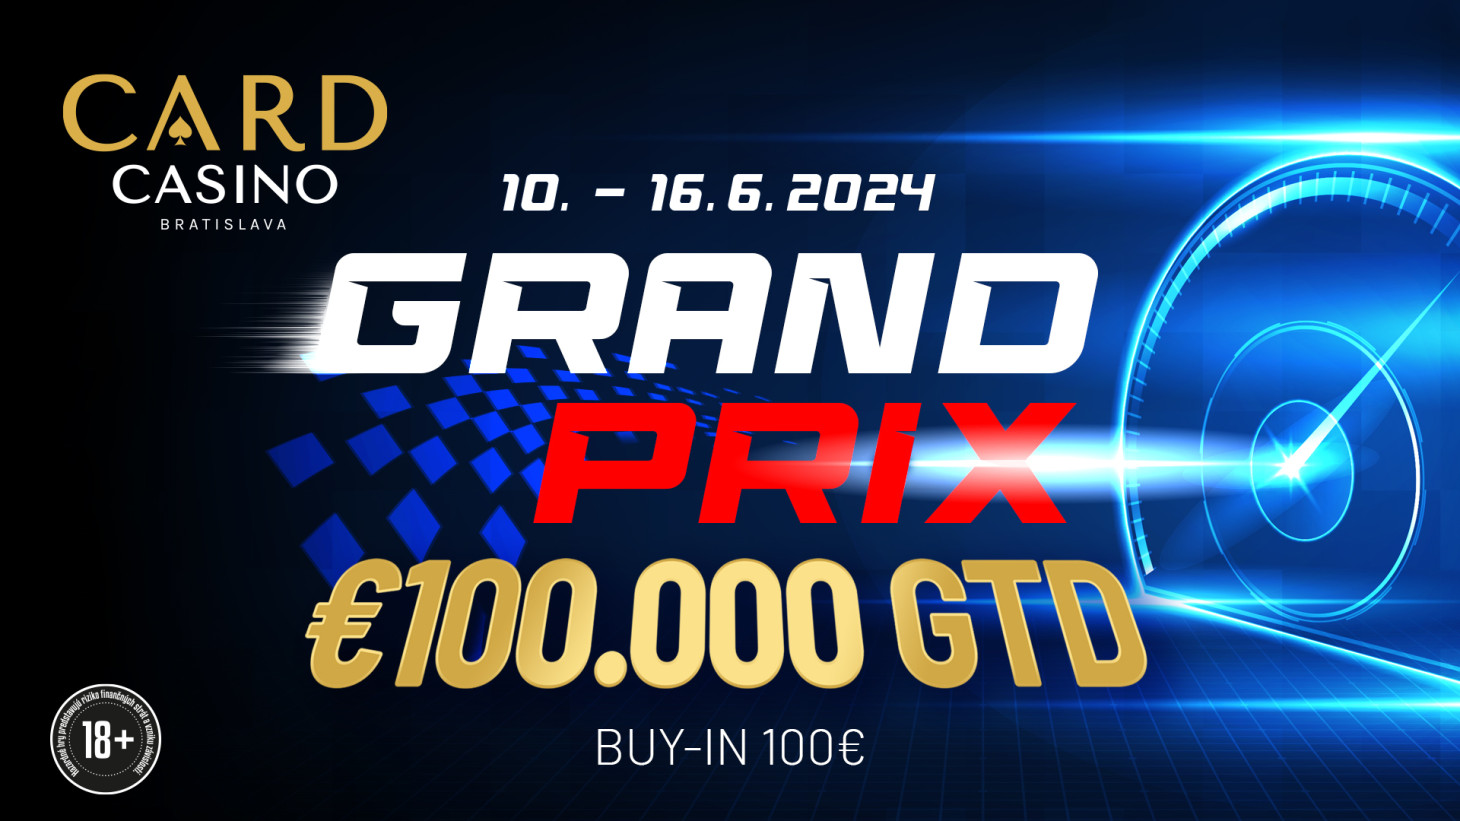 The next Grand Prix with €100,000 GTD will be played in mid-June